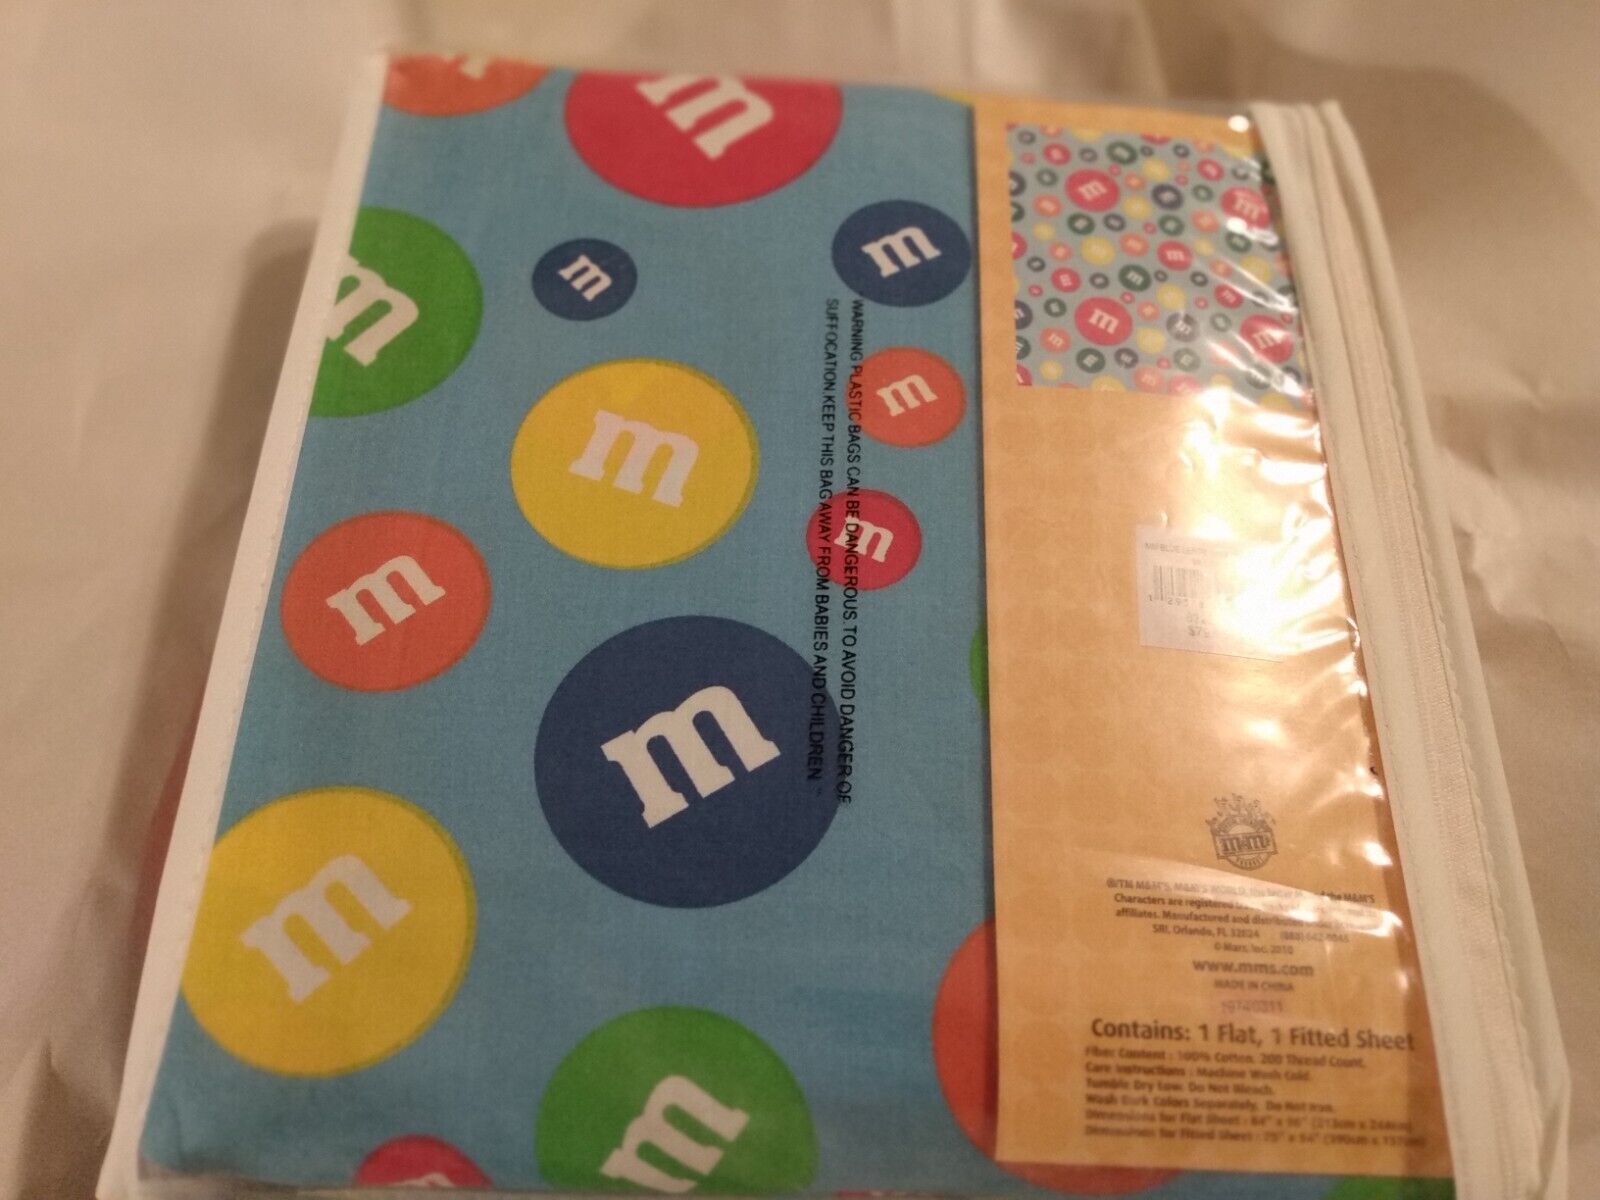 Rare M&M's Candy FULL Size Sheets Set 1 Flat & 1 Fitted Sheet RARE 2 PCs.